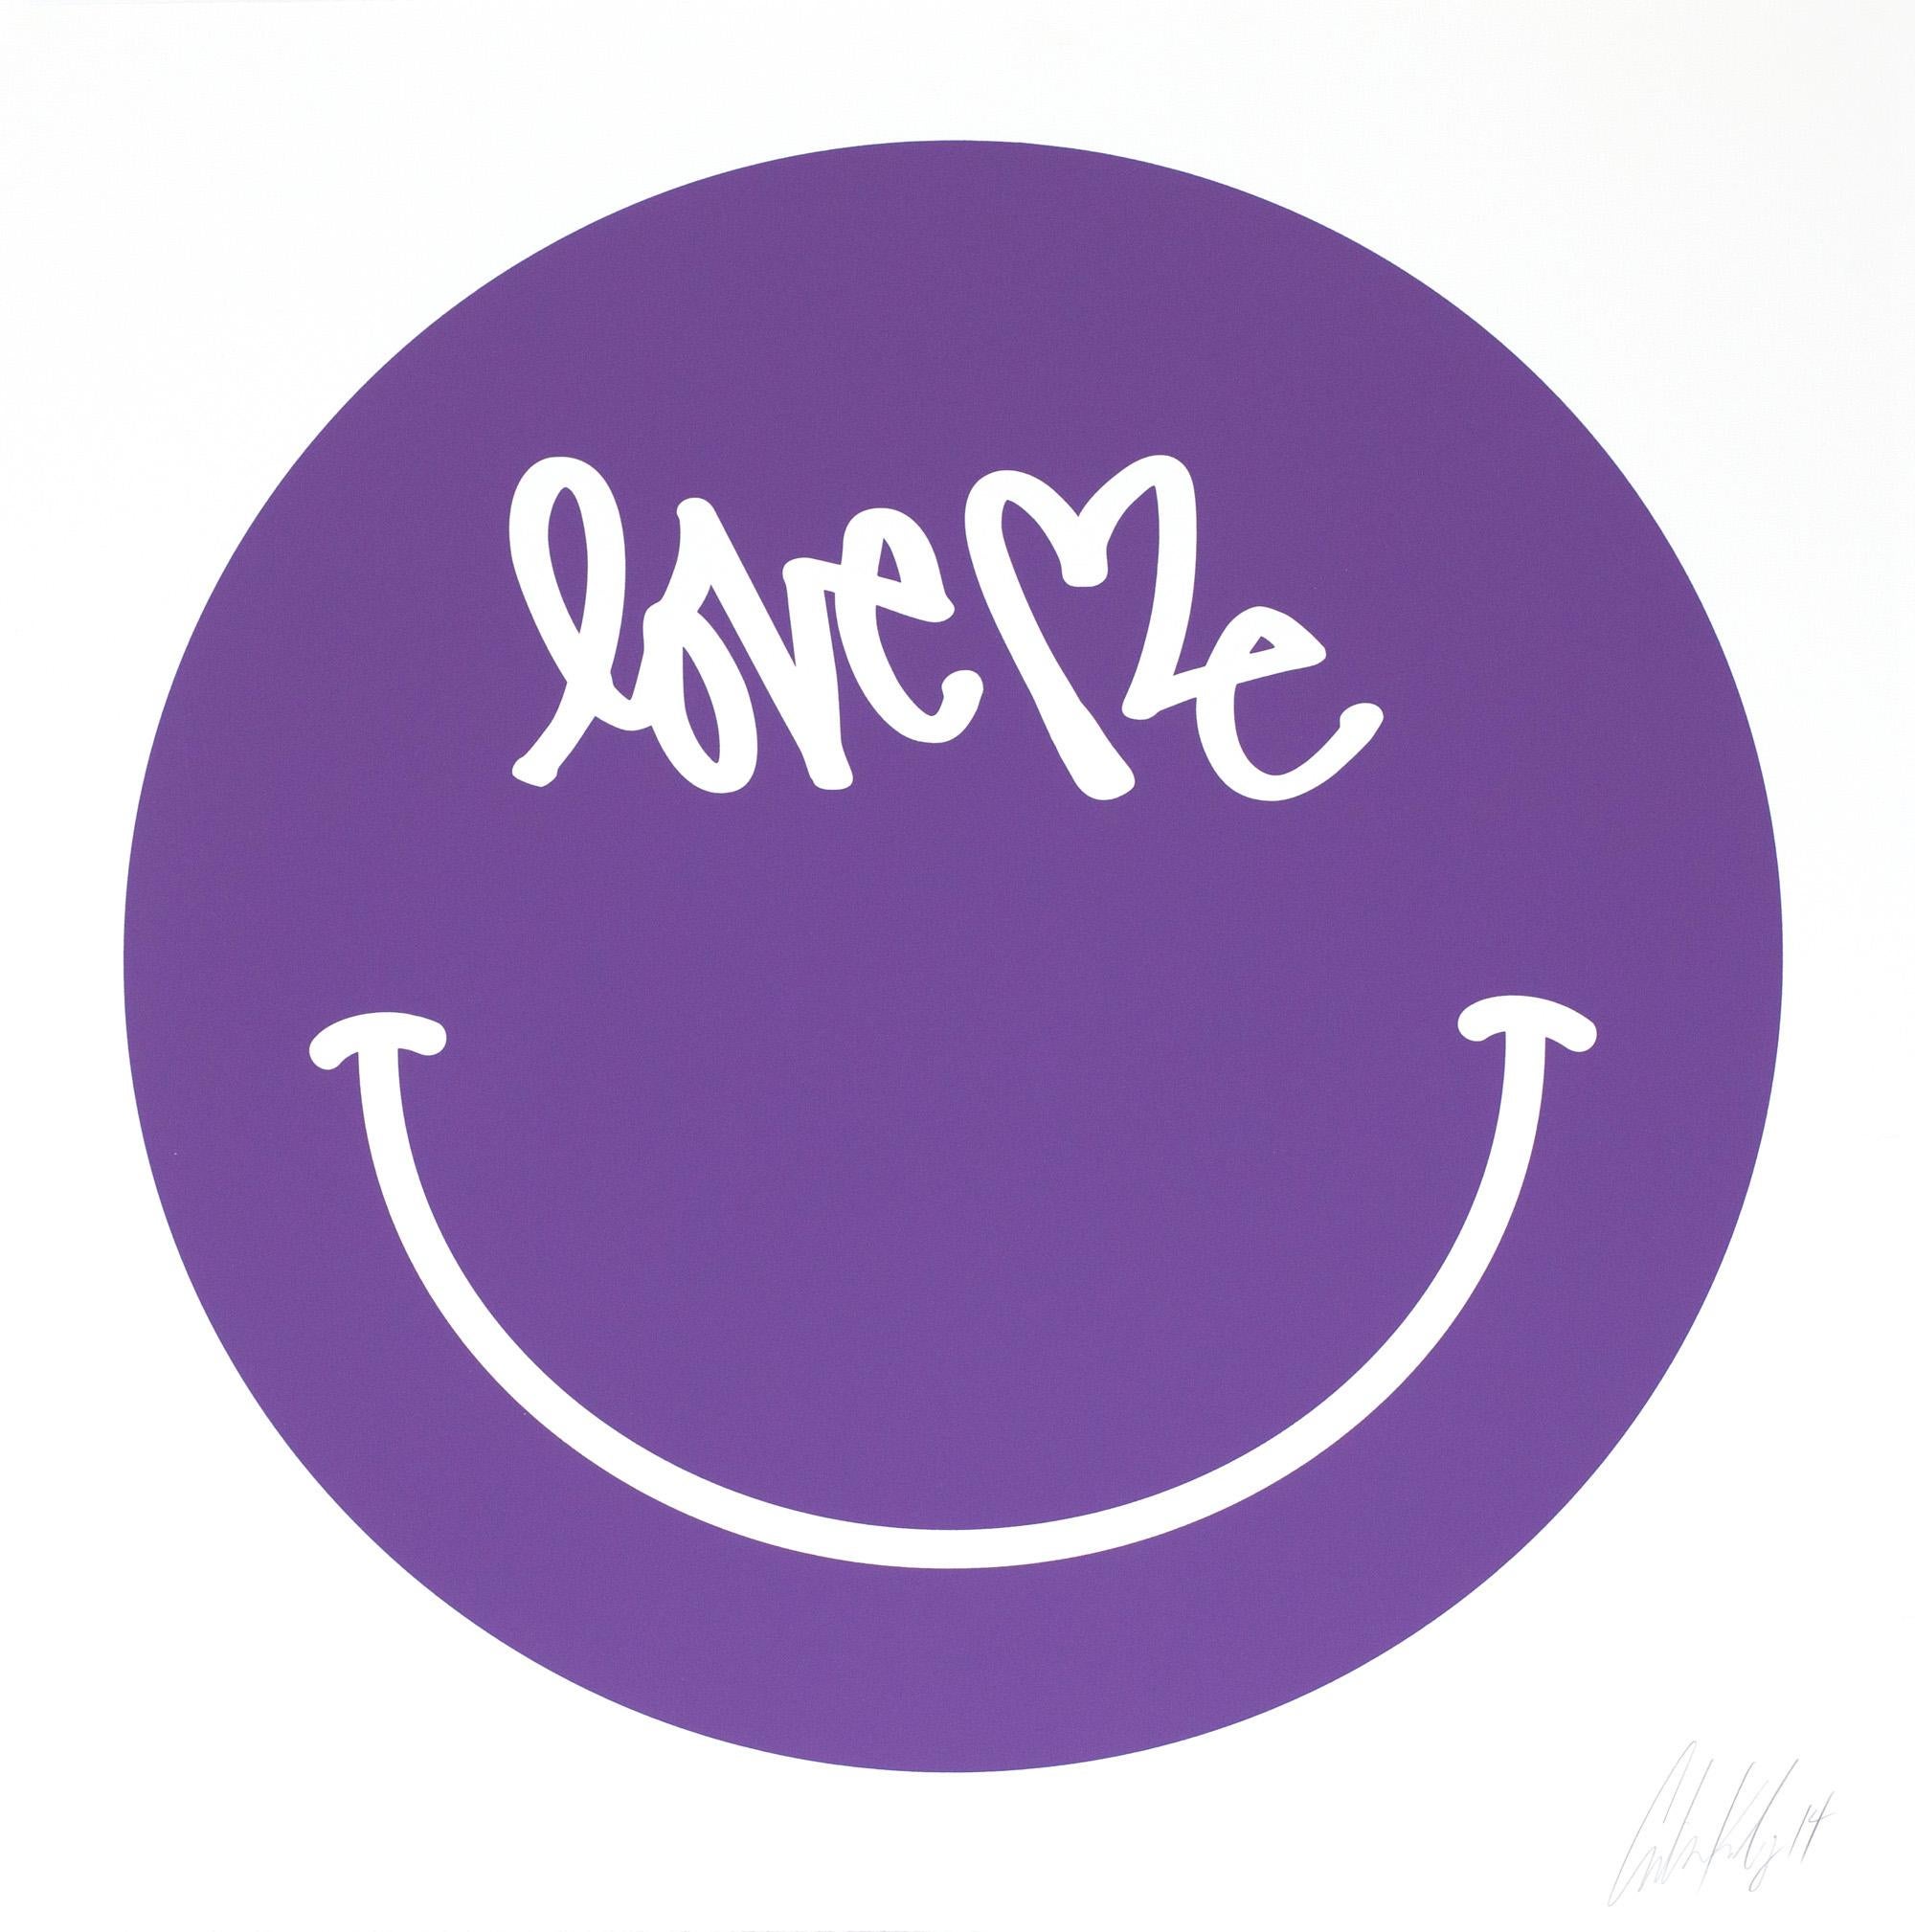 "Love Me," Purple Smiley Face screen print by New York based artist Curtis Kulig
Using a most universal symbol, 'The Smiley', Curtis Kulig replaces the eyes with his world renown "Love Me" signature. At 28 inches square, this hand signed